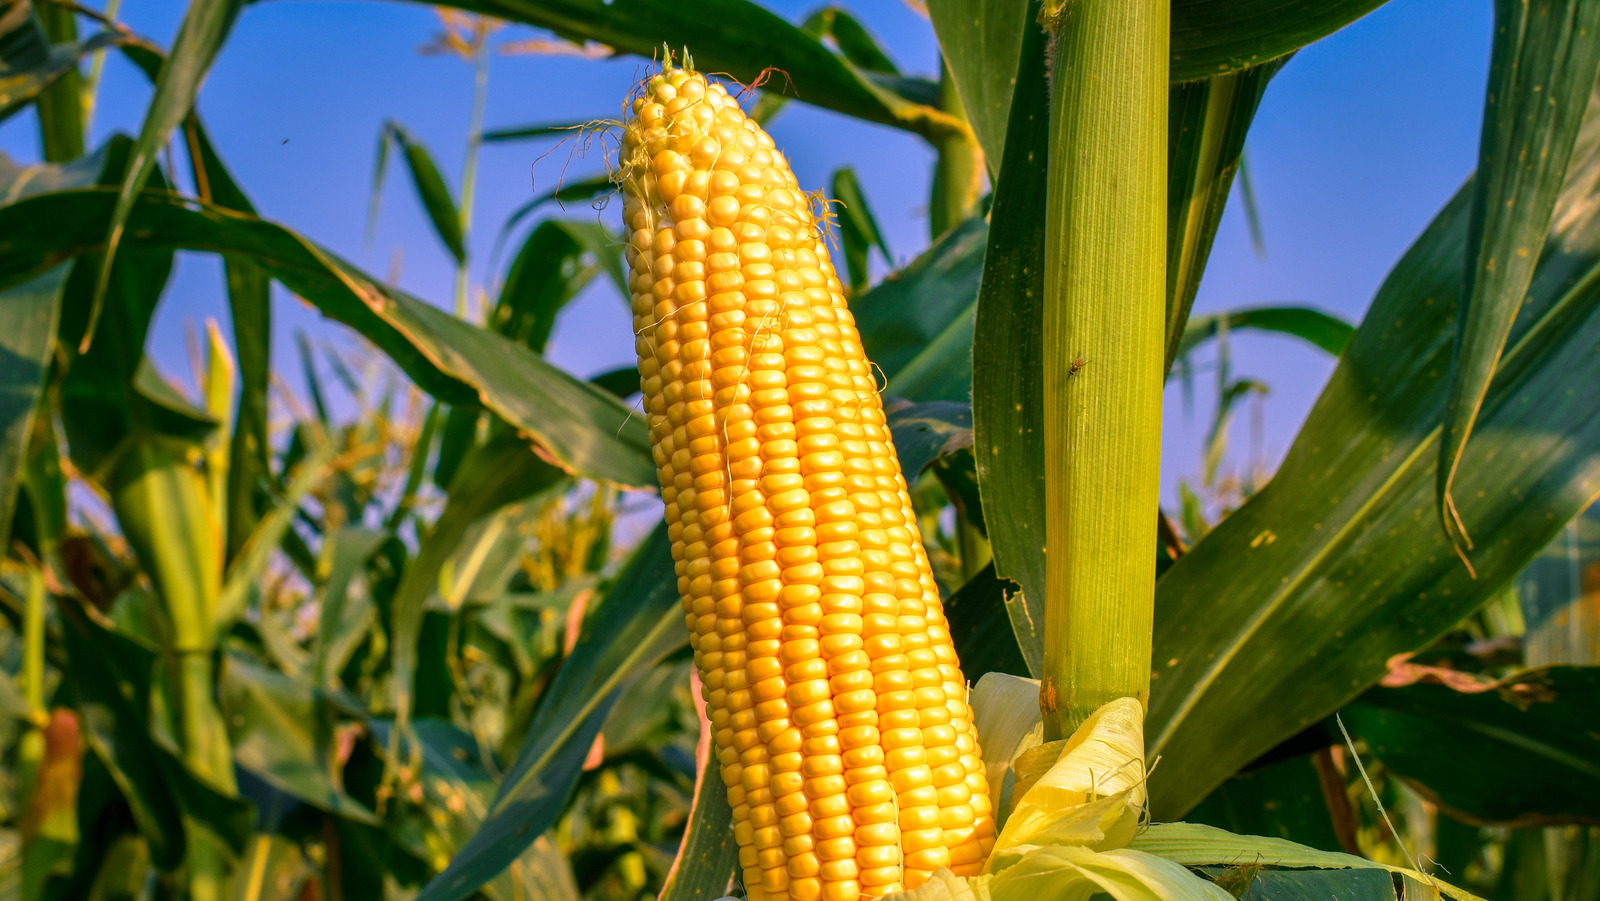 Why The Upcoming US Corn Harvest Will Be A Major Disappointment